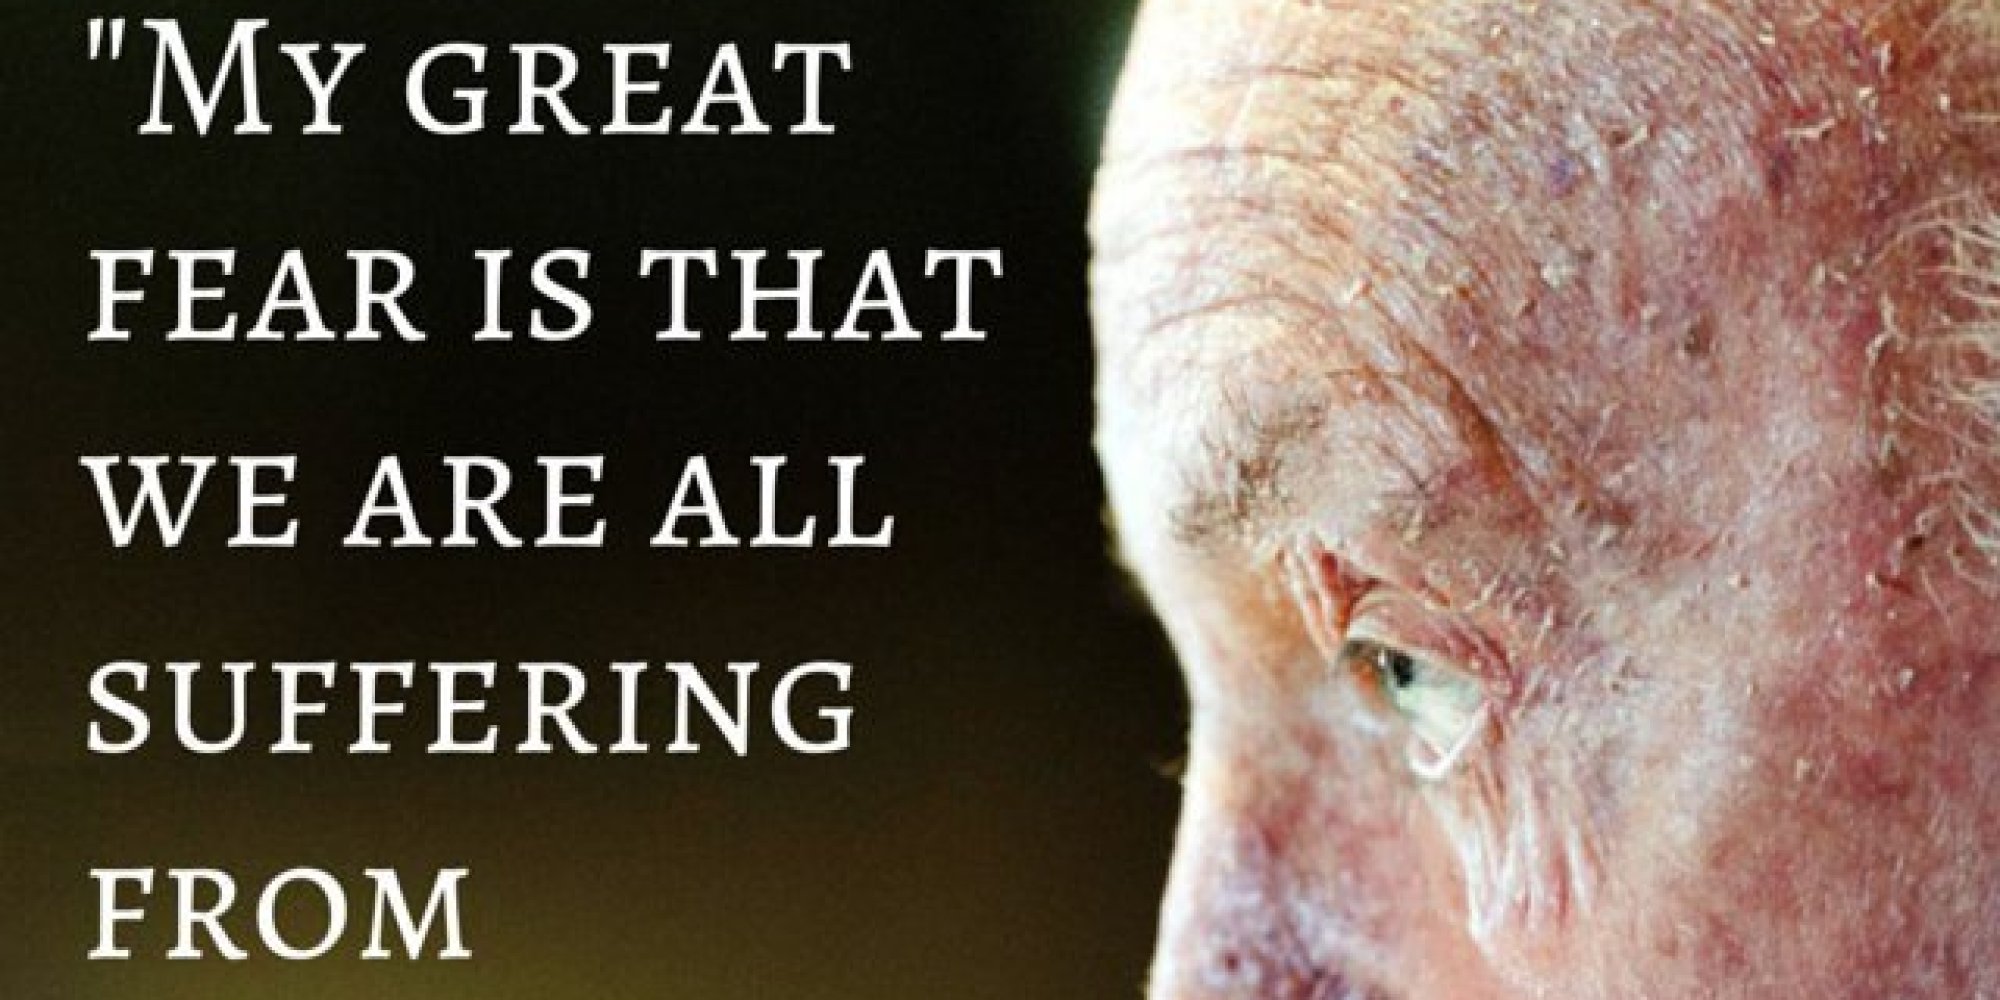 10 Eduardo Galeano Quotes That Will Change The Way You View Human